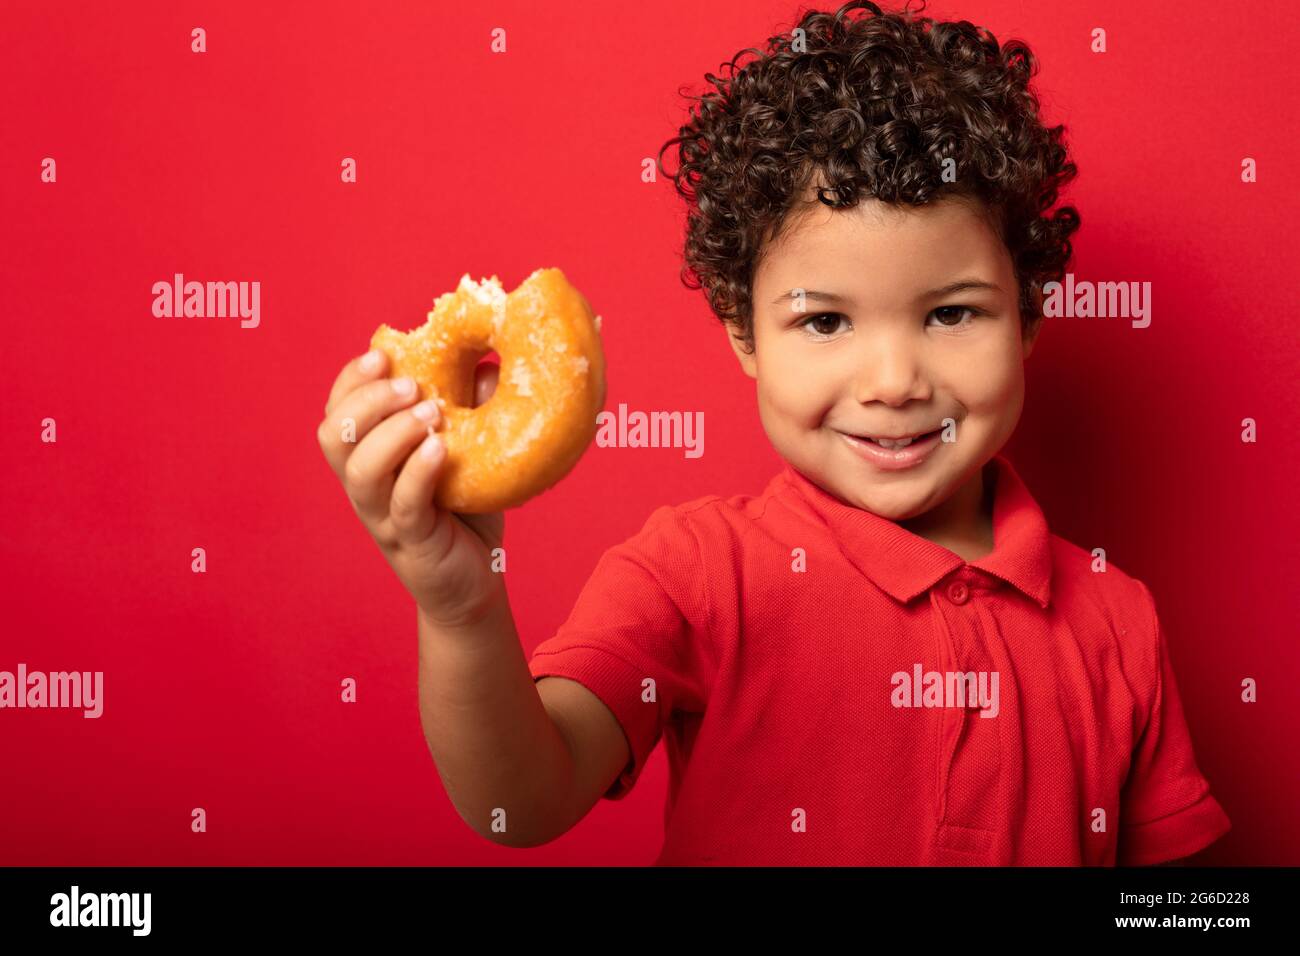 Adorable child with curly hair eating sweet tasty doughnut and looking at camera on red background Stock Photo